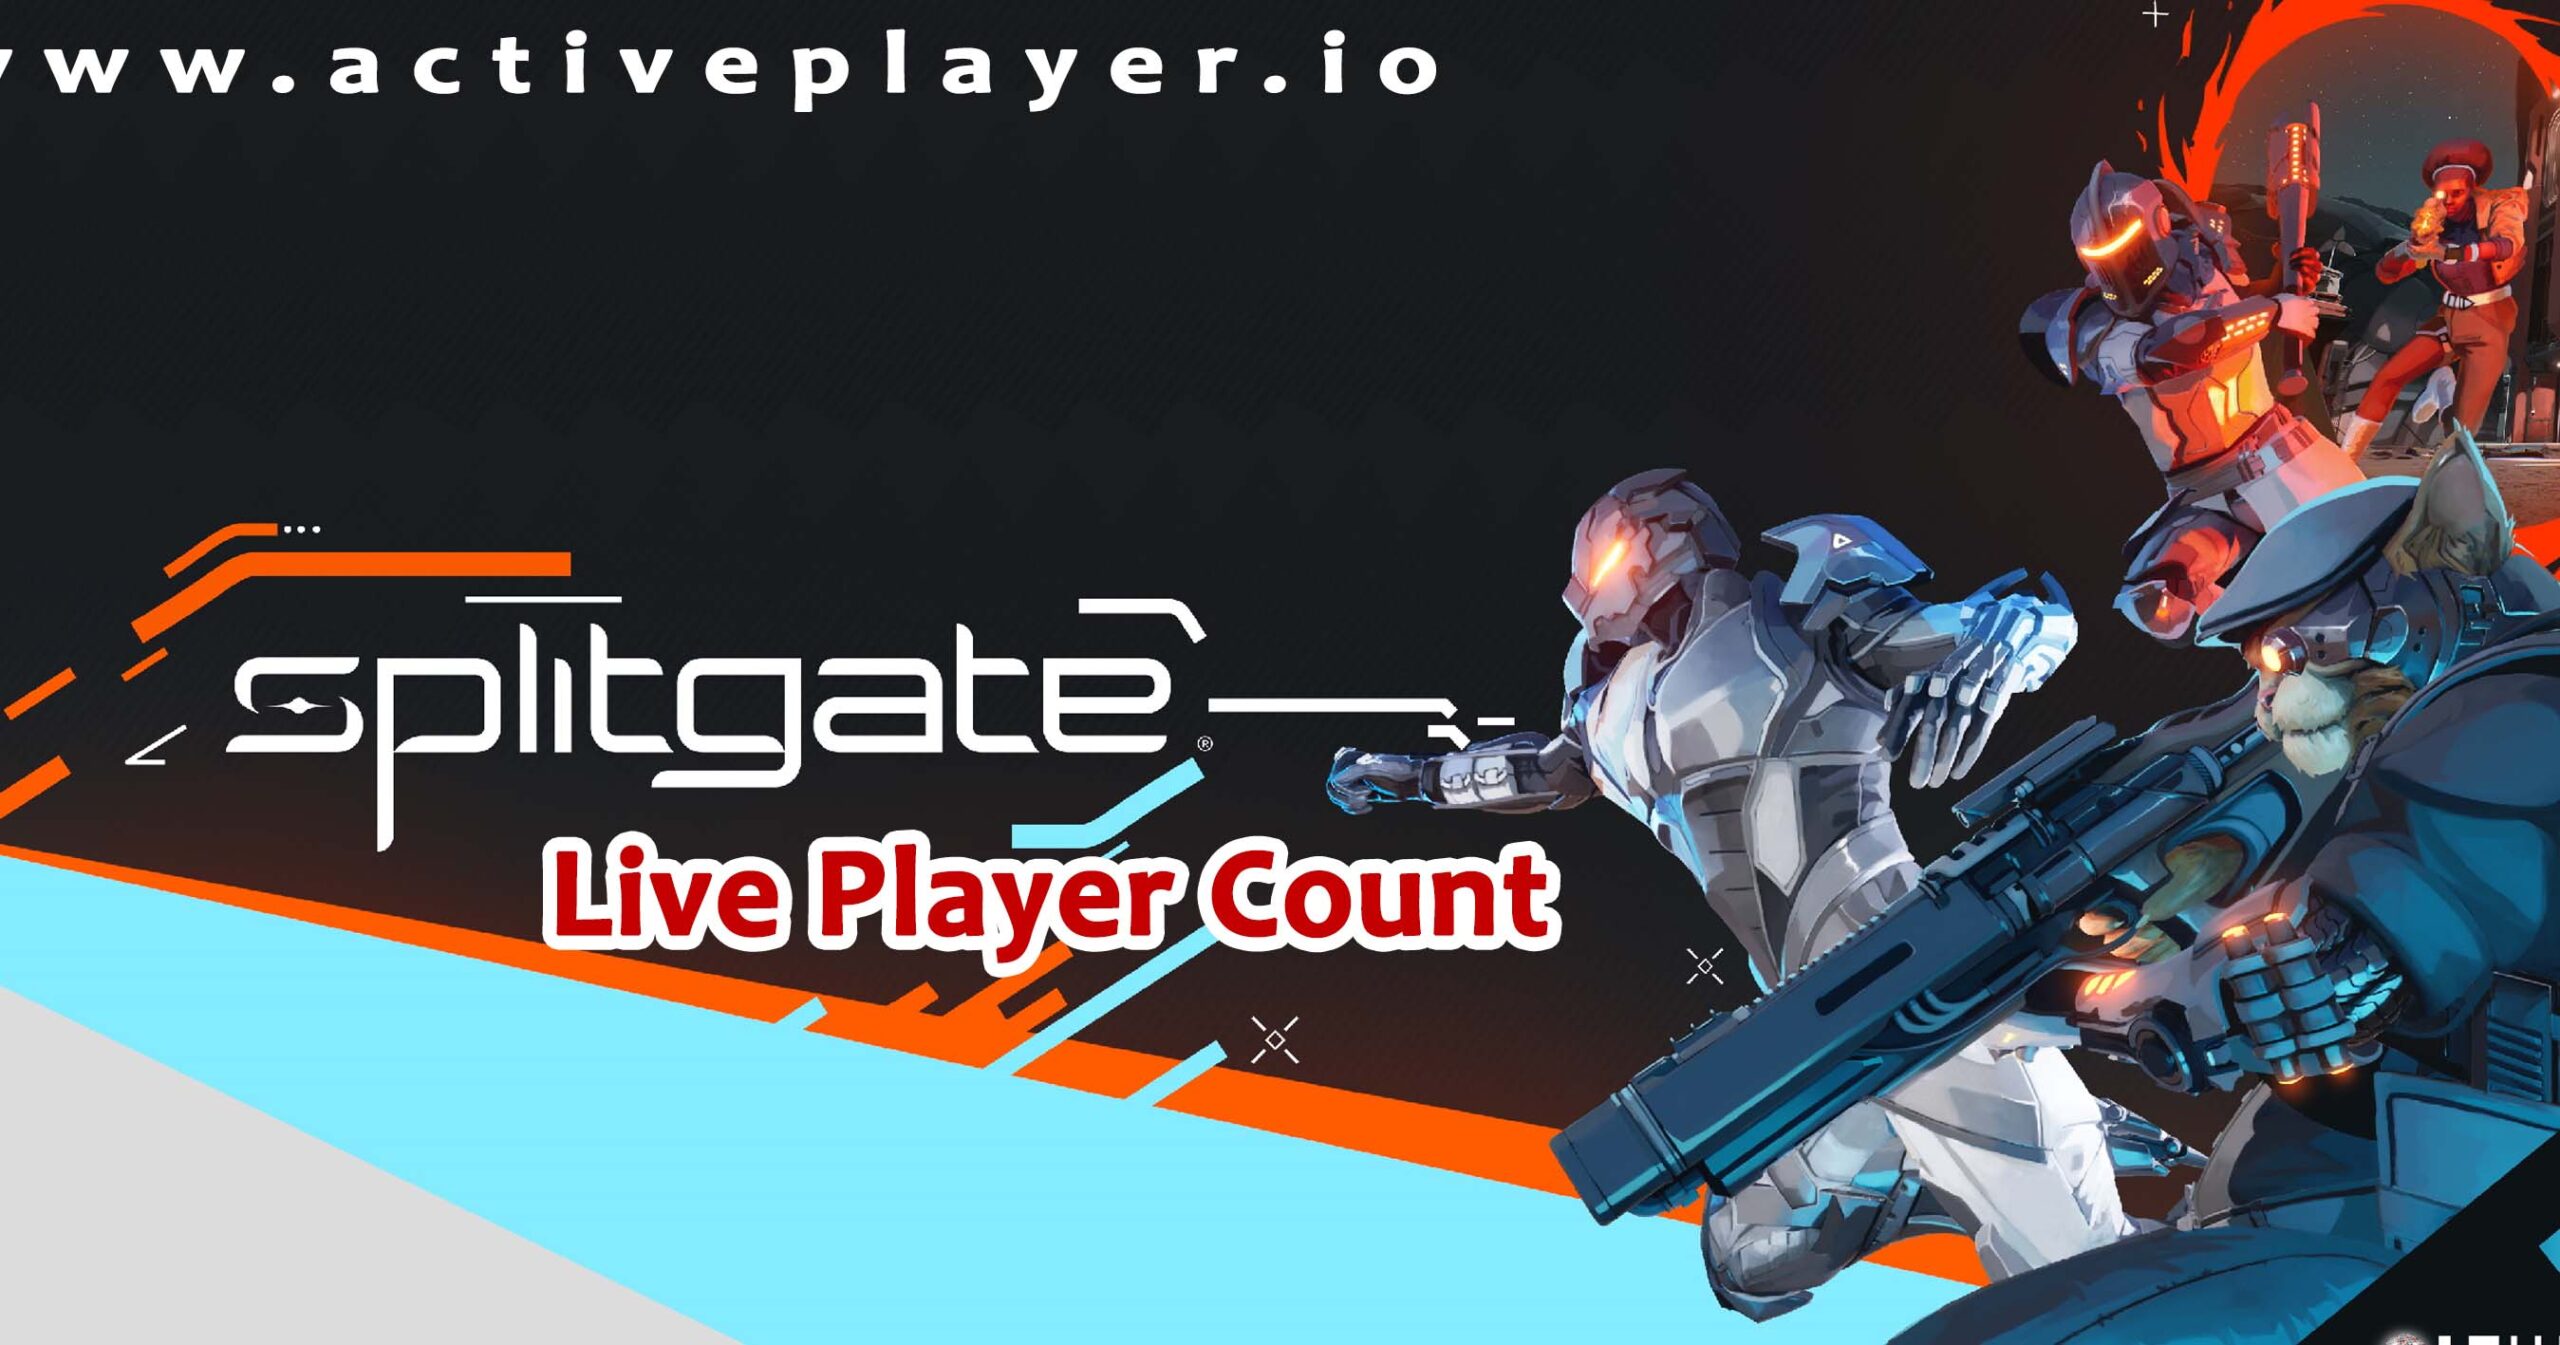 How Many People Play Splitgate?